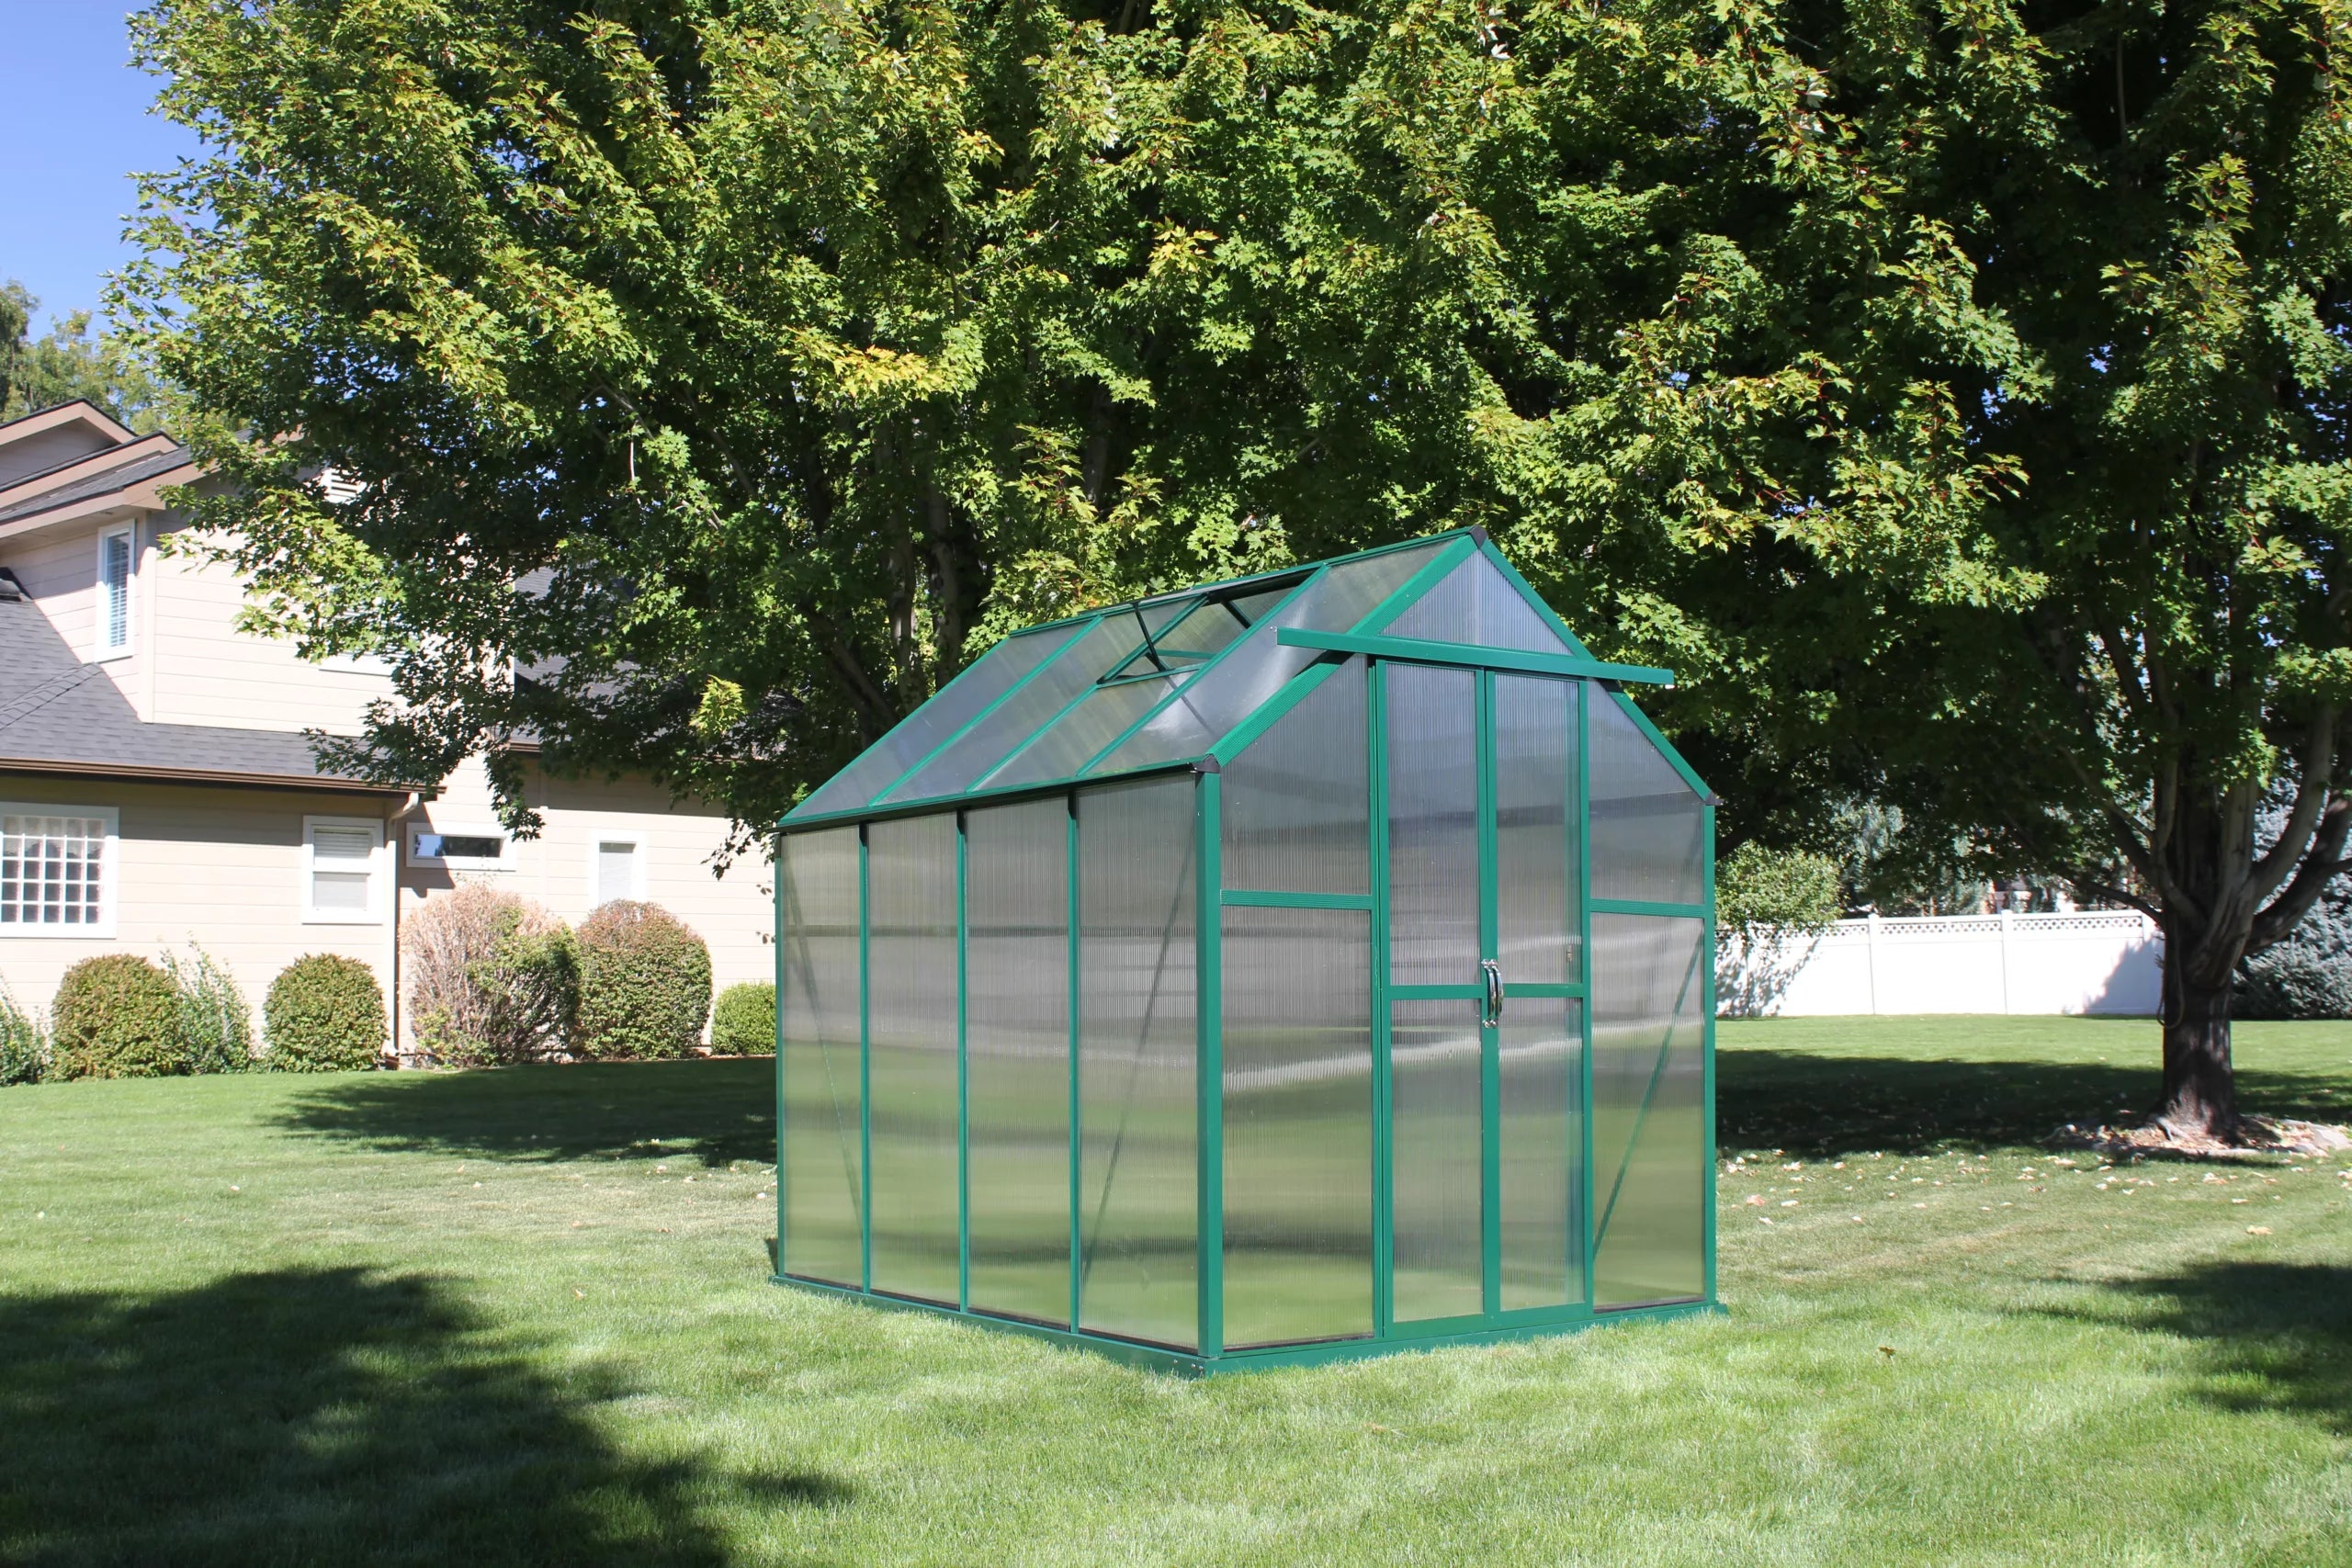 Grandio Element 6x8 greenhouse positioned on lush grass, illustrating the compact design and efficient use of space for gardening.